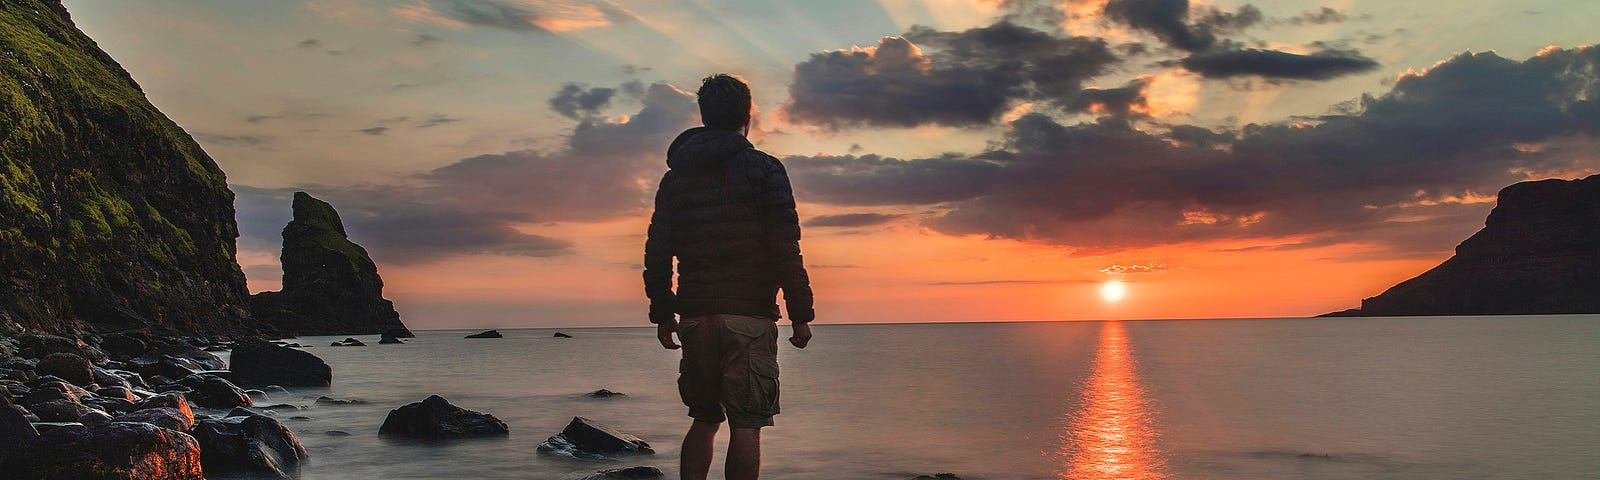 A man in shorts and a hoodie stands barefooted on a rock in a smoking sea, watching a fiery sun on the horizon, clouds above it, refracting the light like rays from a crown.